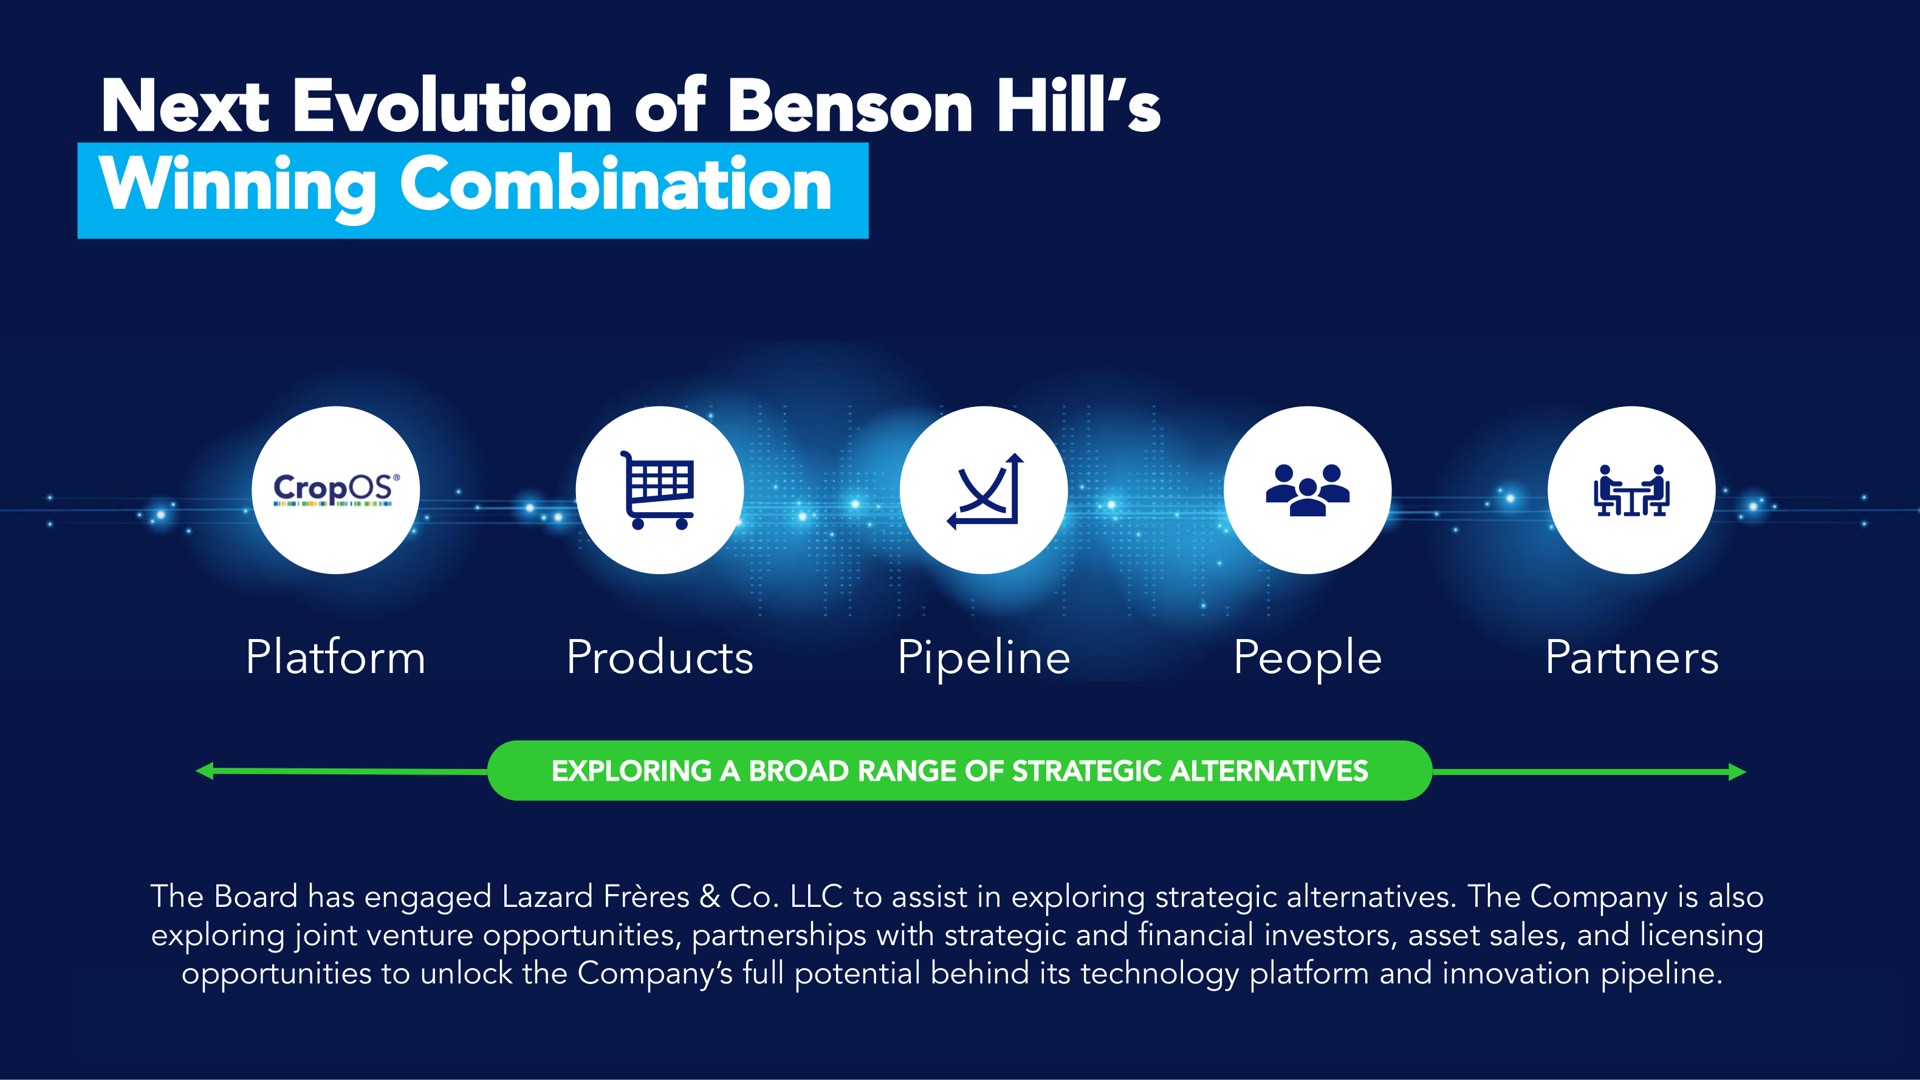 next evolution of hill winning combination platform products pipeline people partners | Benson Hill